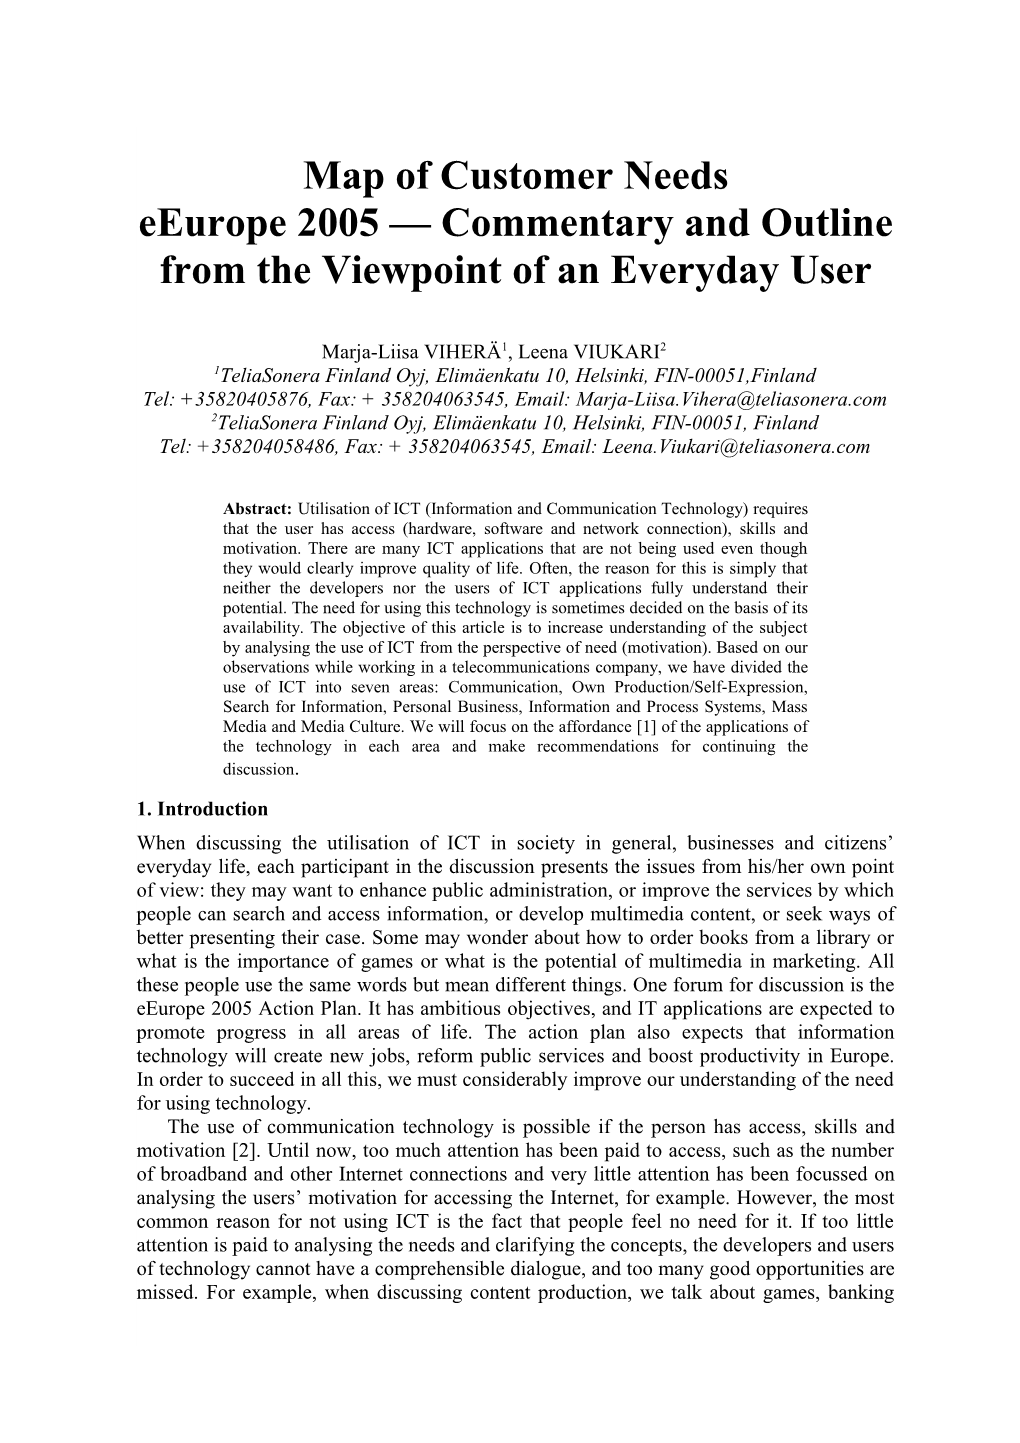 Eeurope 2005 Commentary and Outline from the Viewpoint of an Everyday User